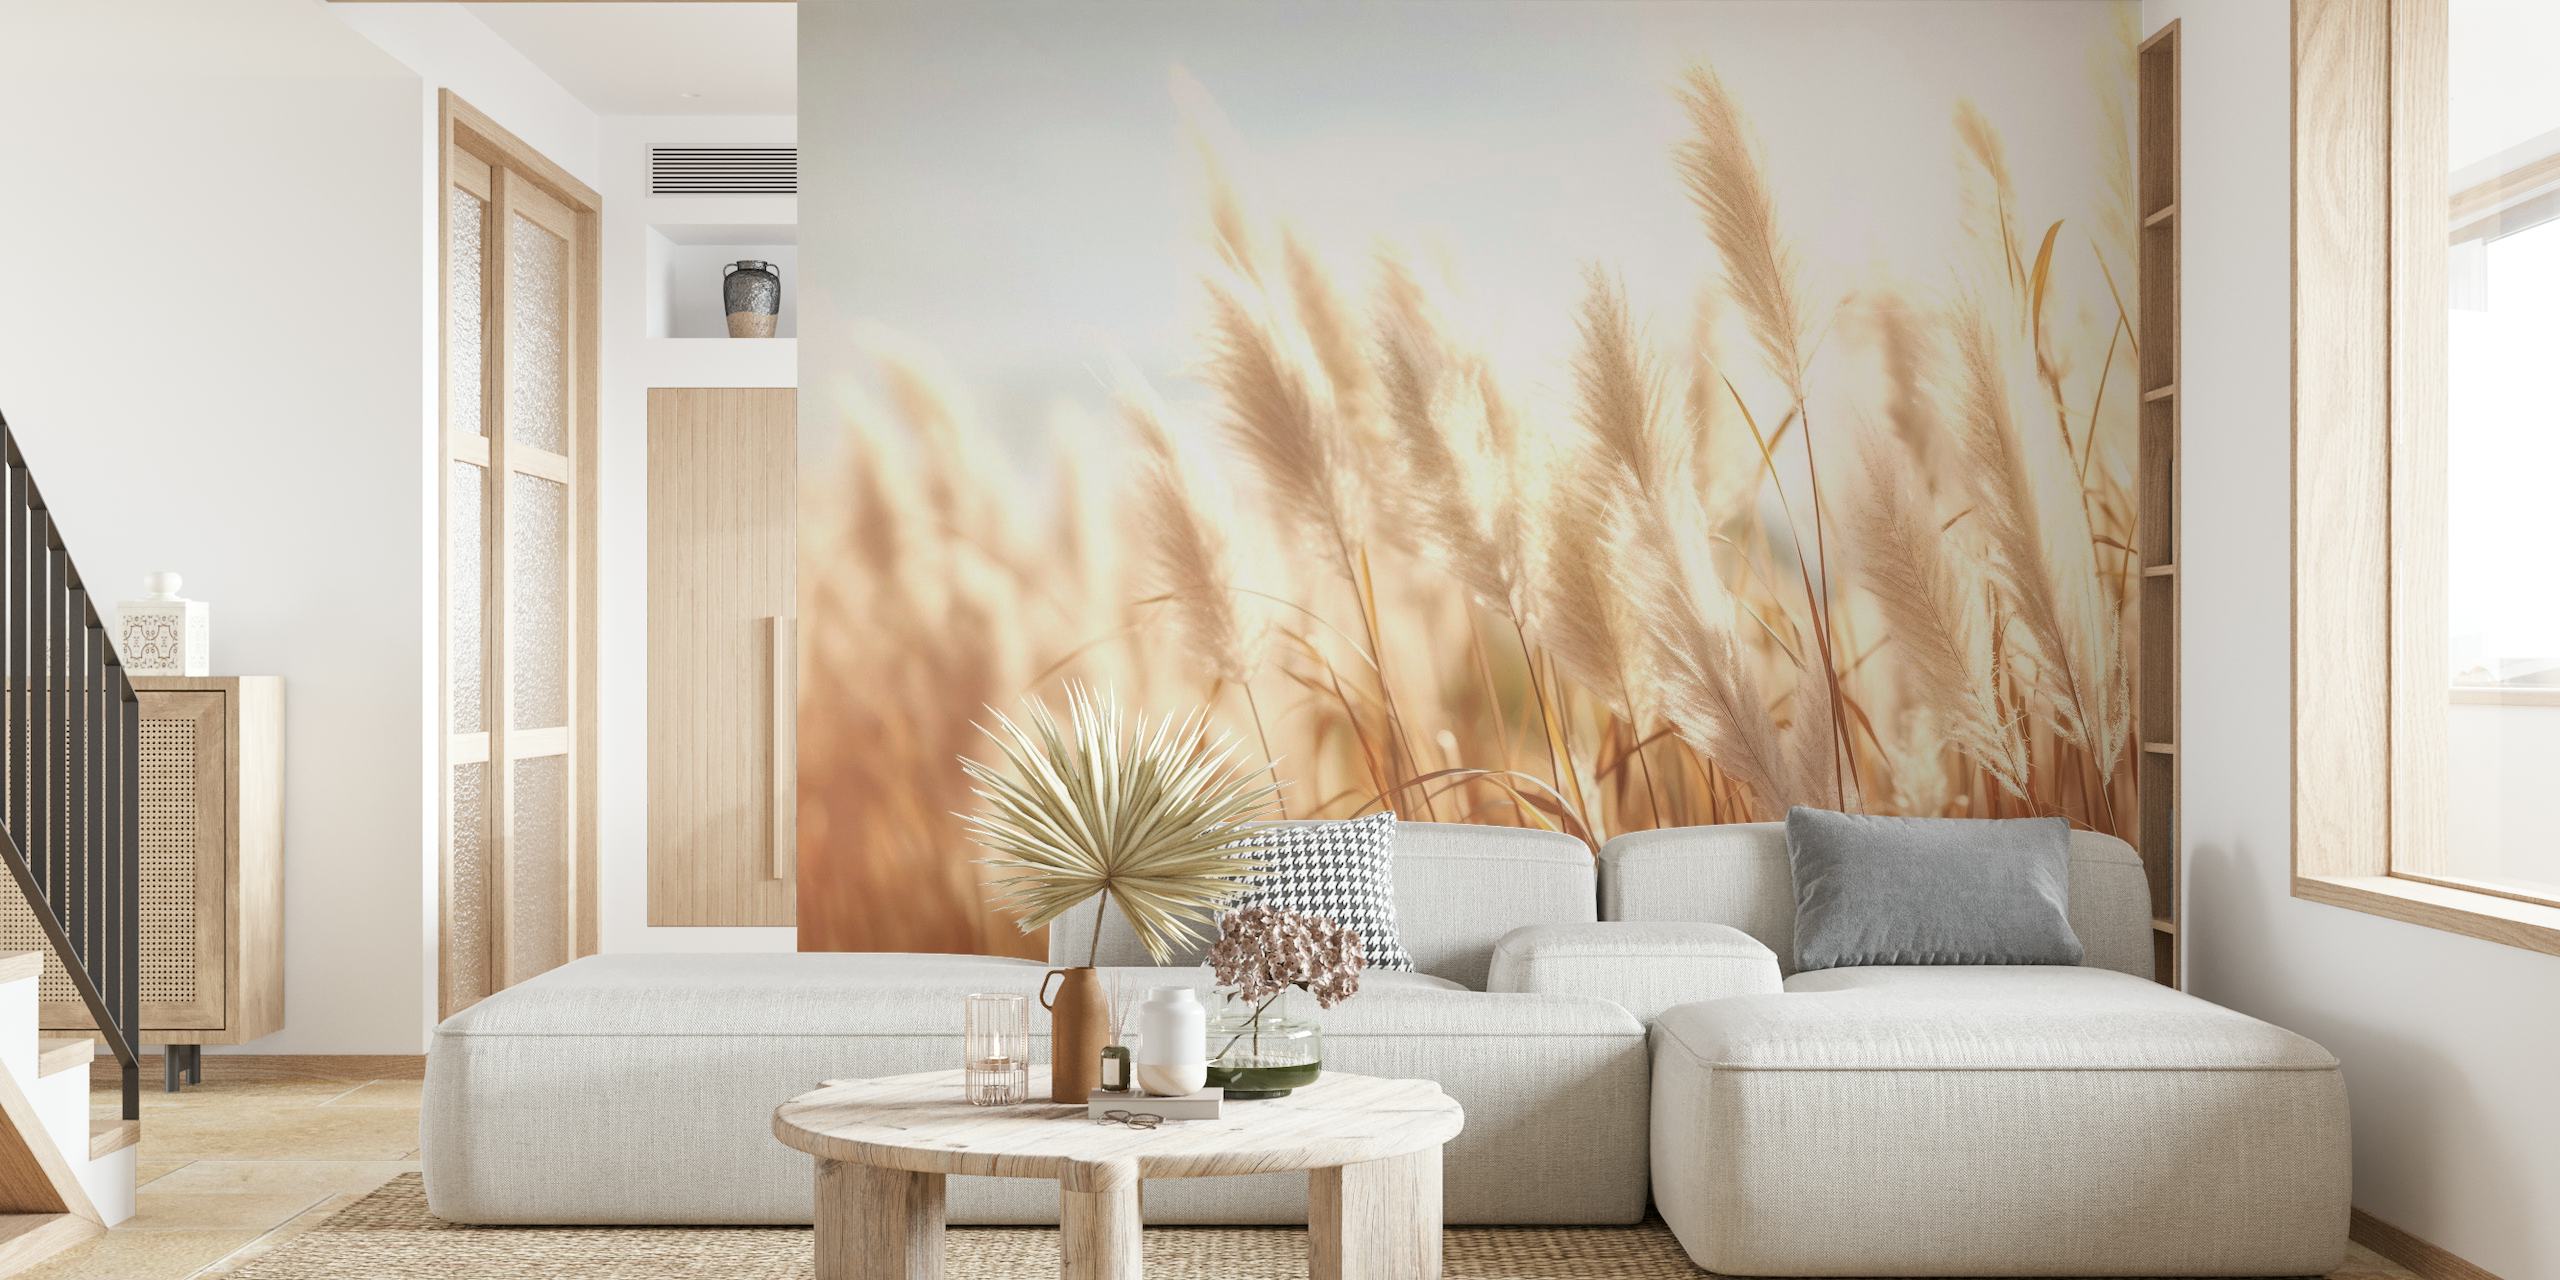 Plume of Tranquility wall mural showing soft grass plumes bathed in warm sunlight.